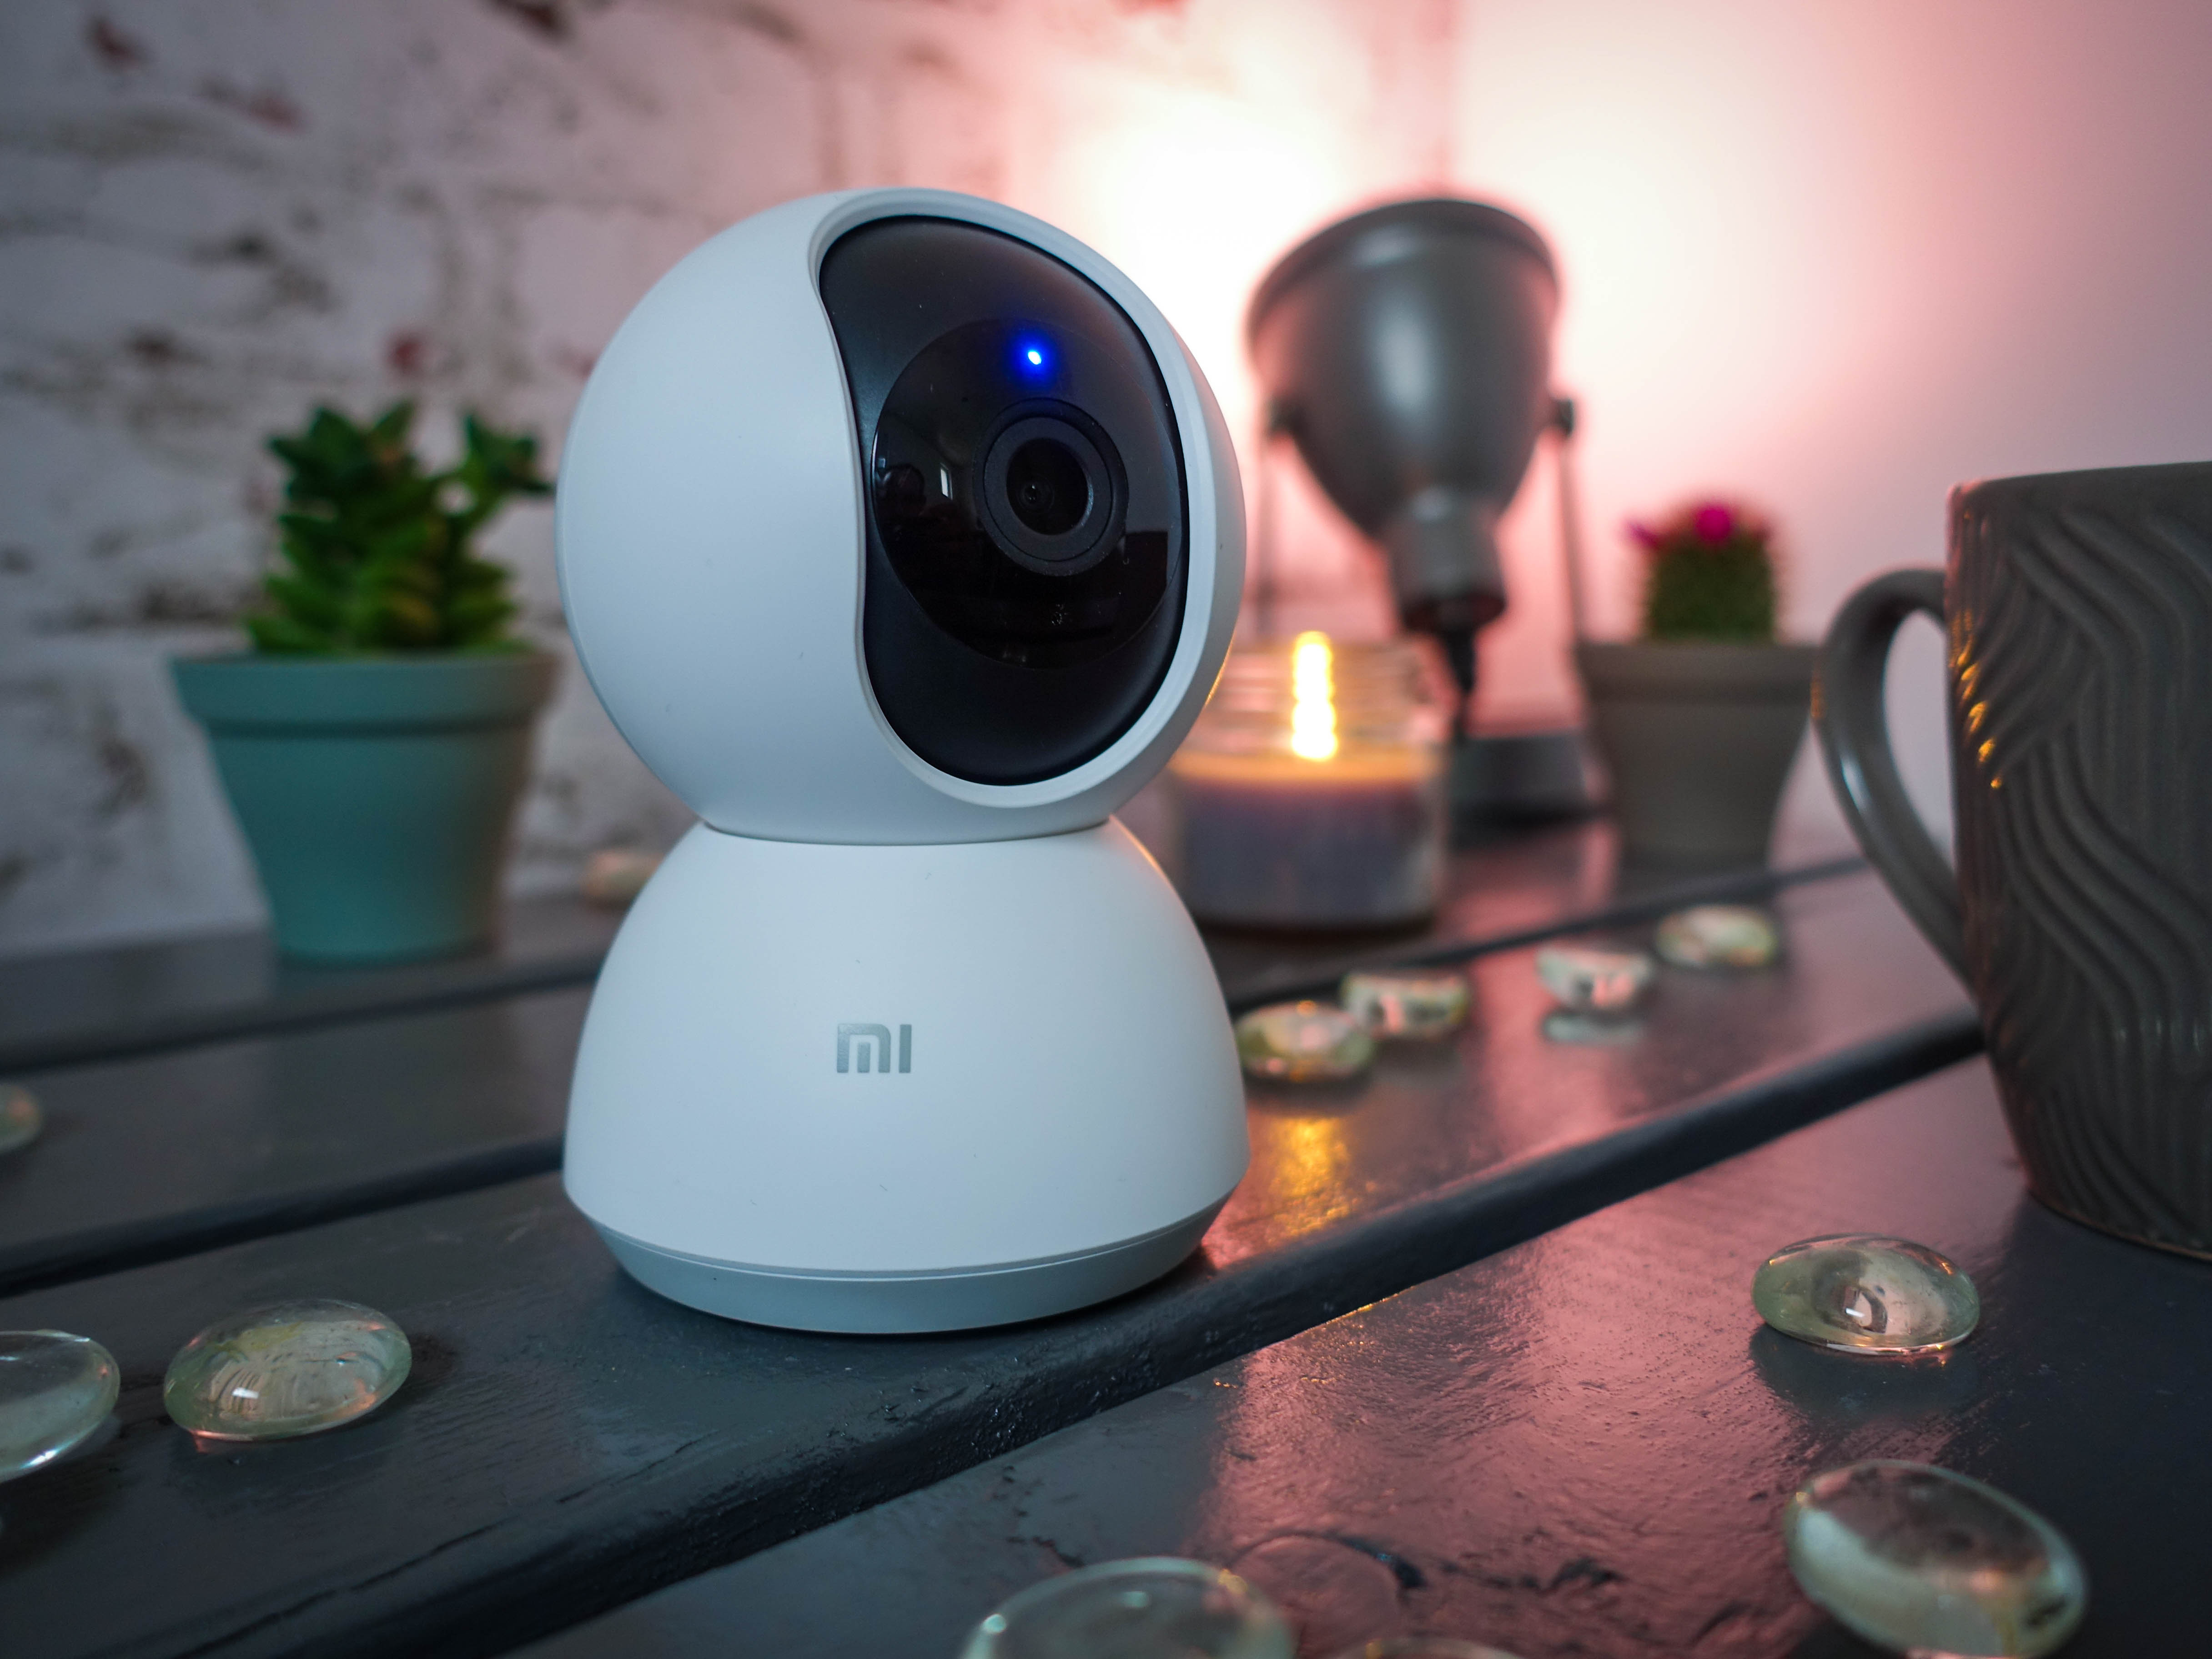 mi home security camera 360 app for pc download windows 10